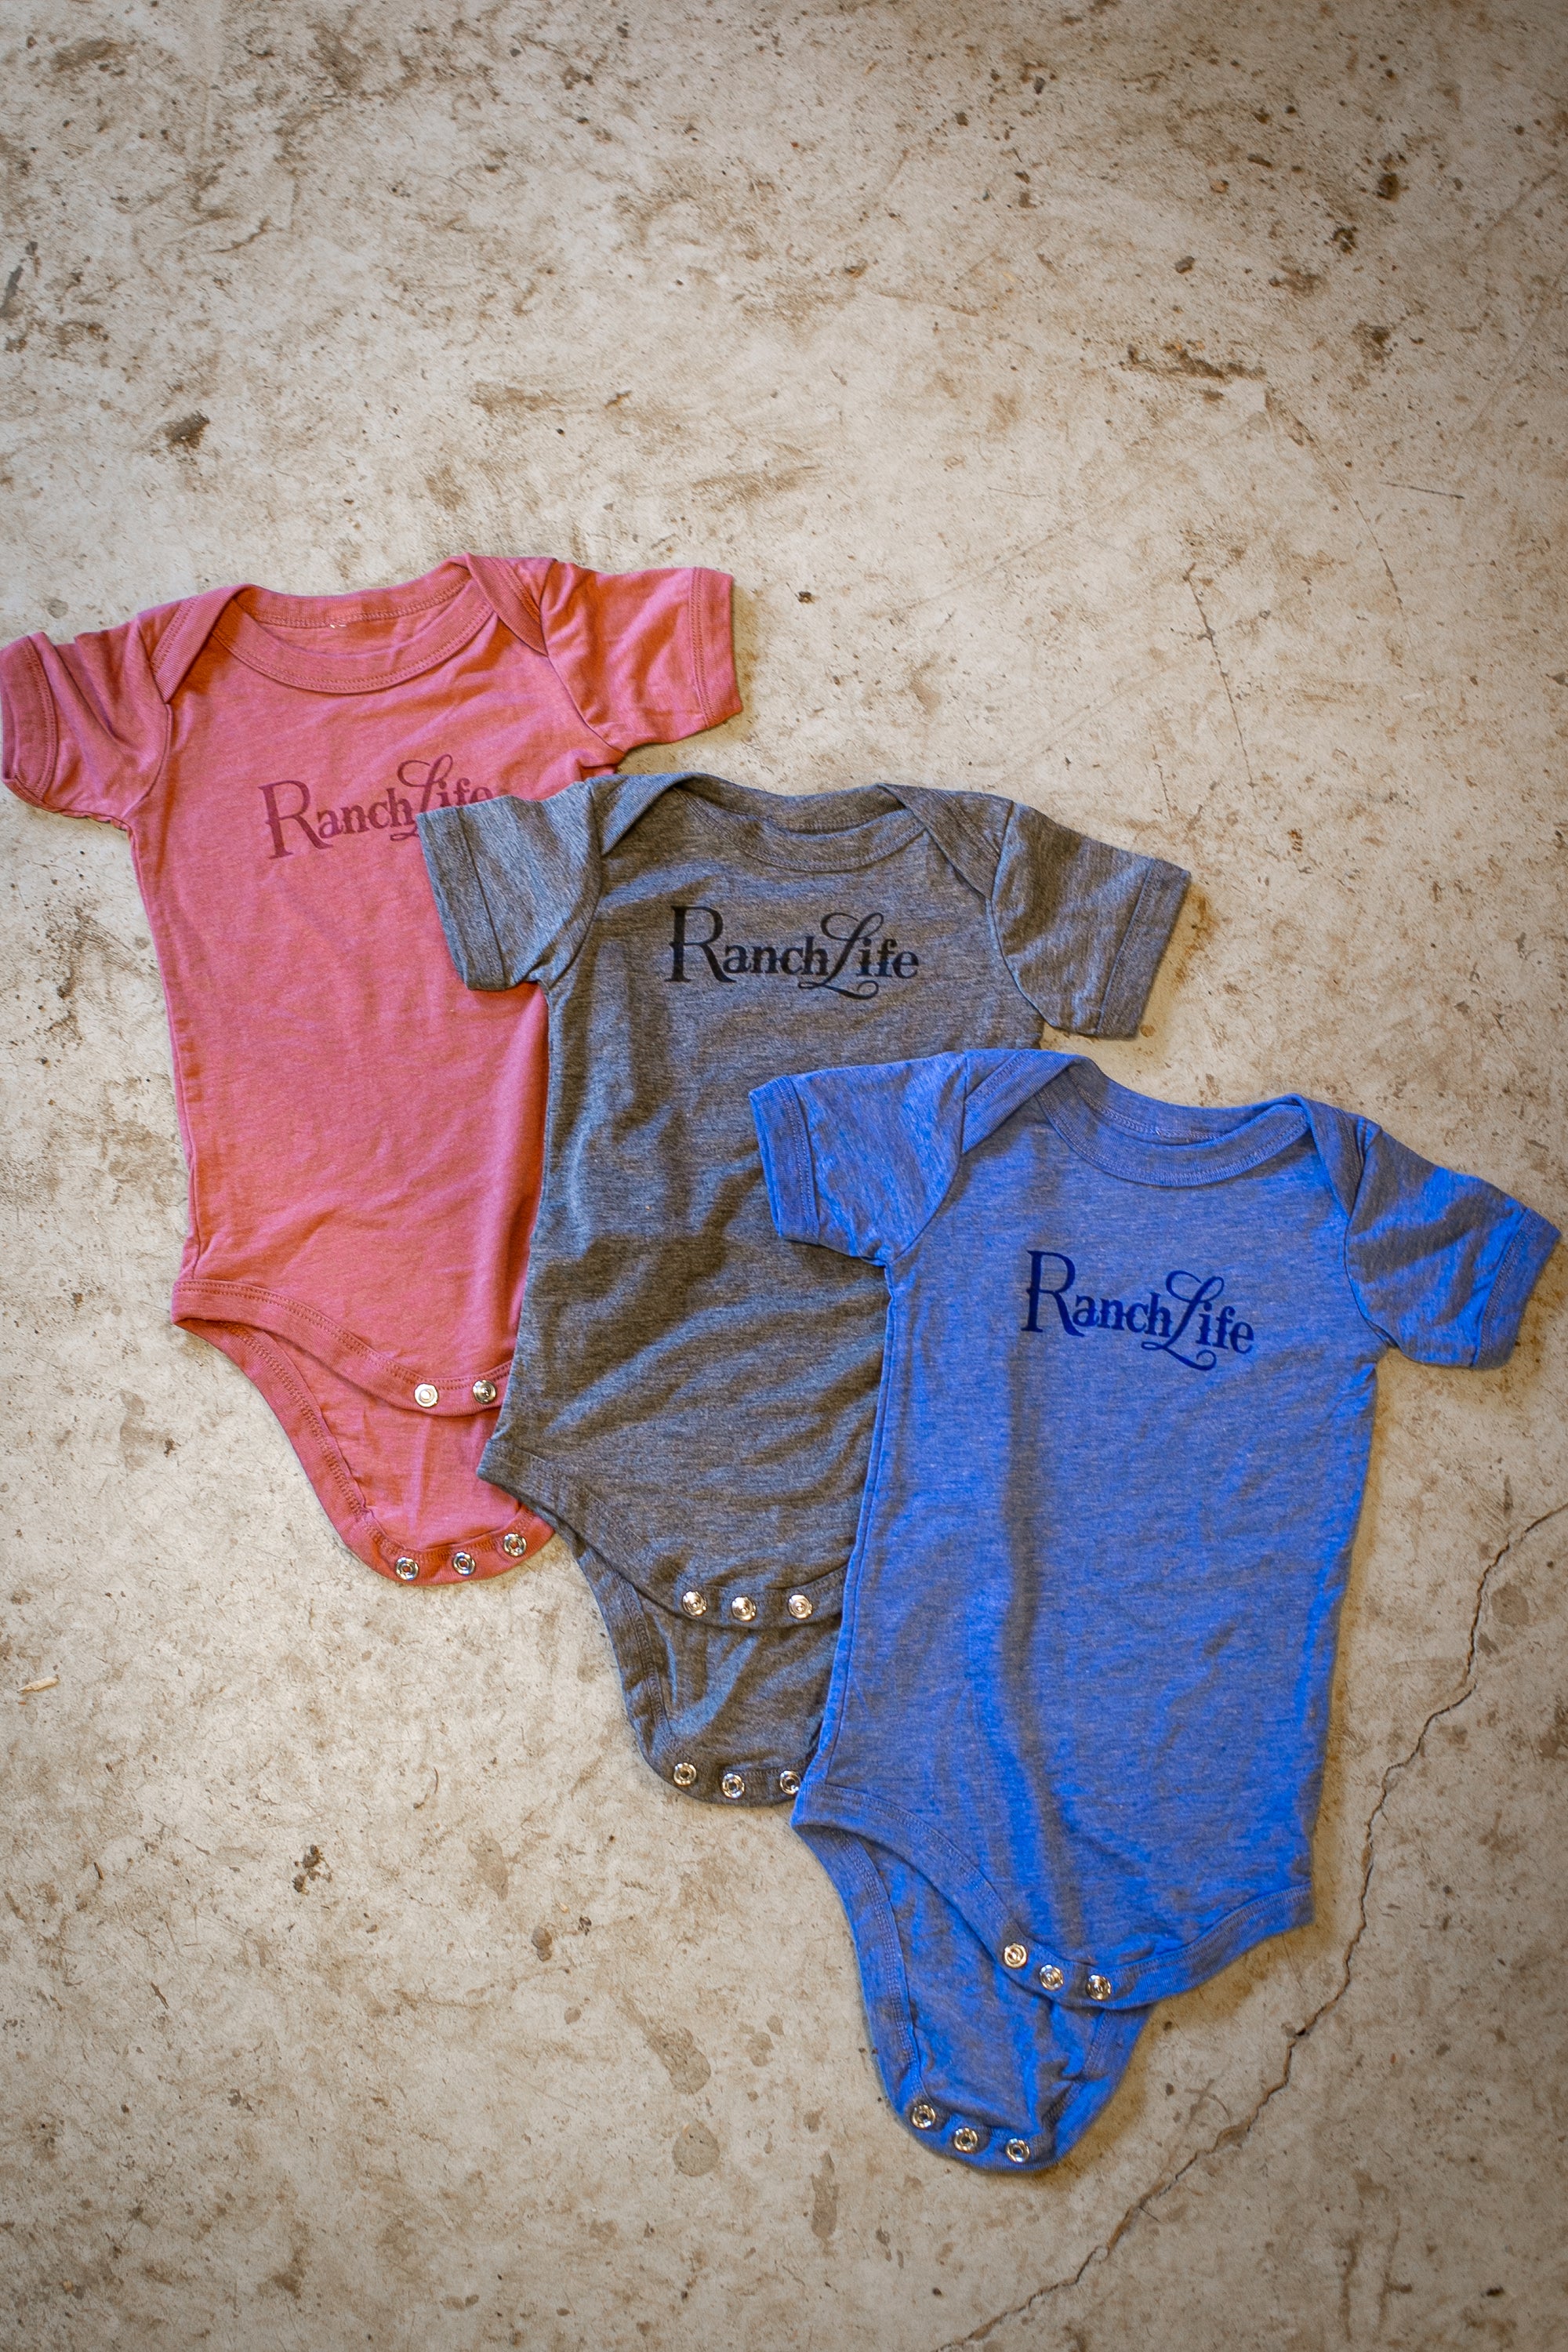 Ranch Life Brand Infant Unisex One-Piece Tees